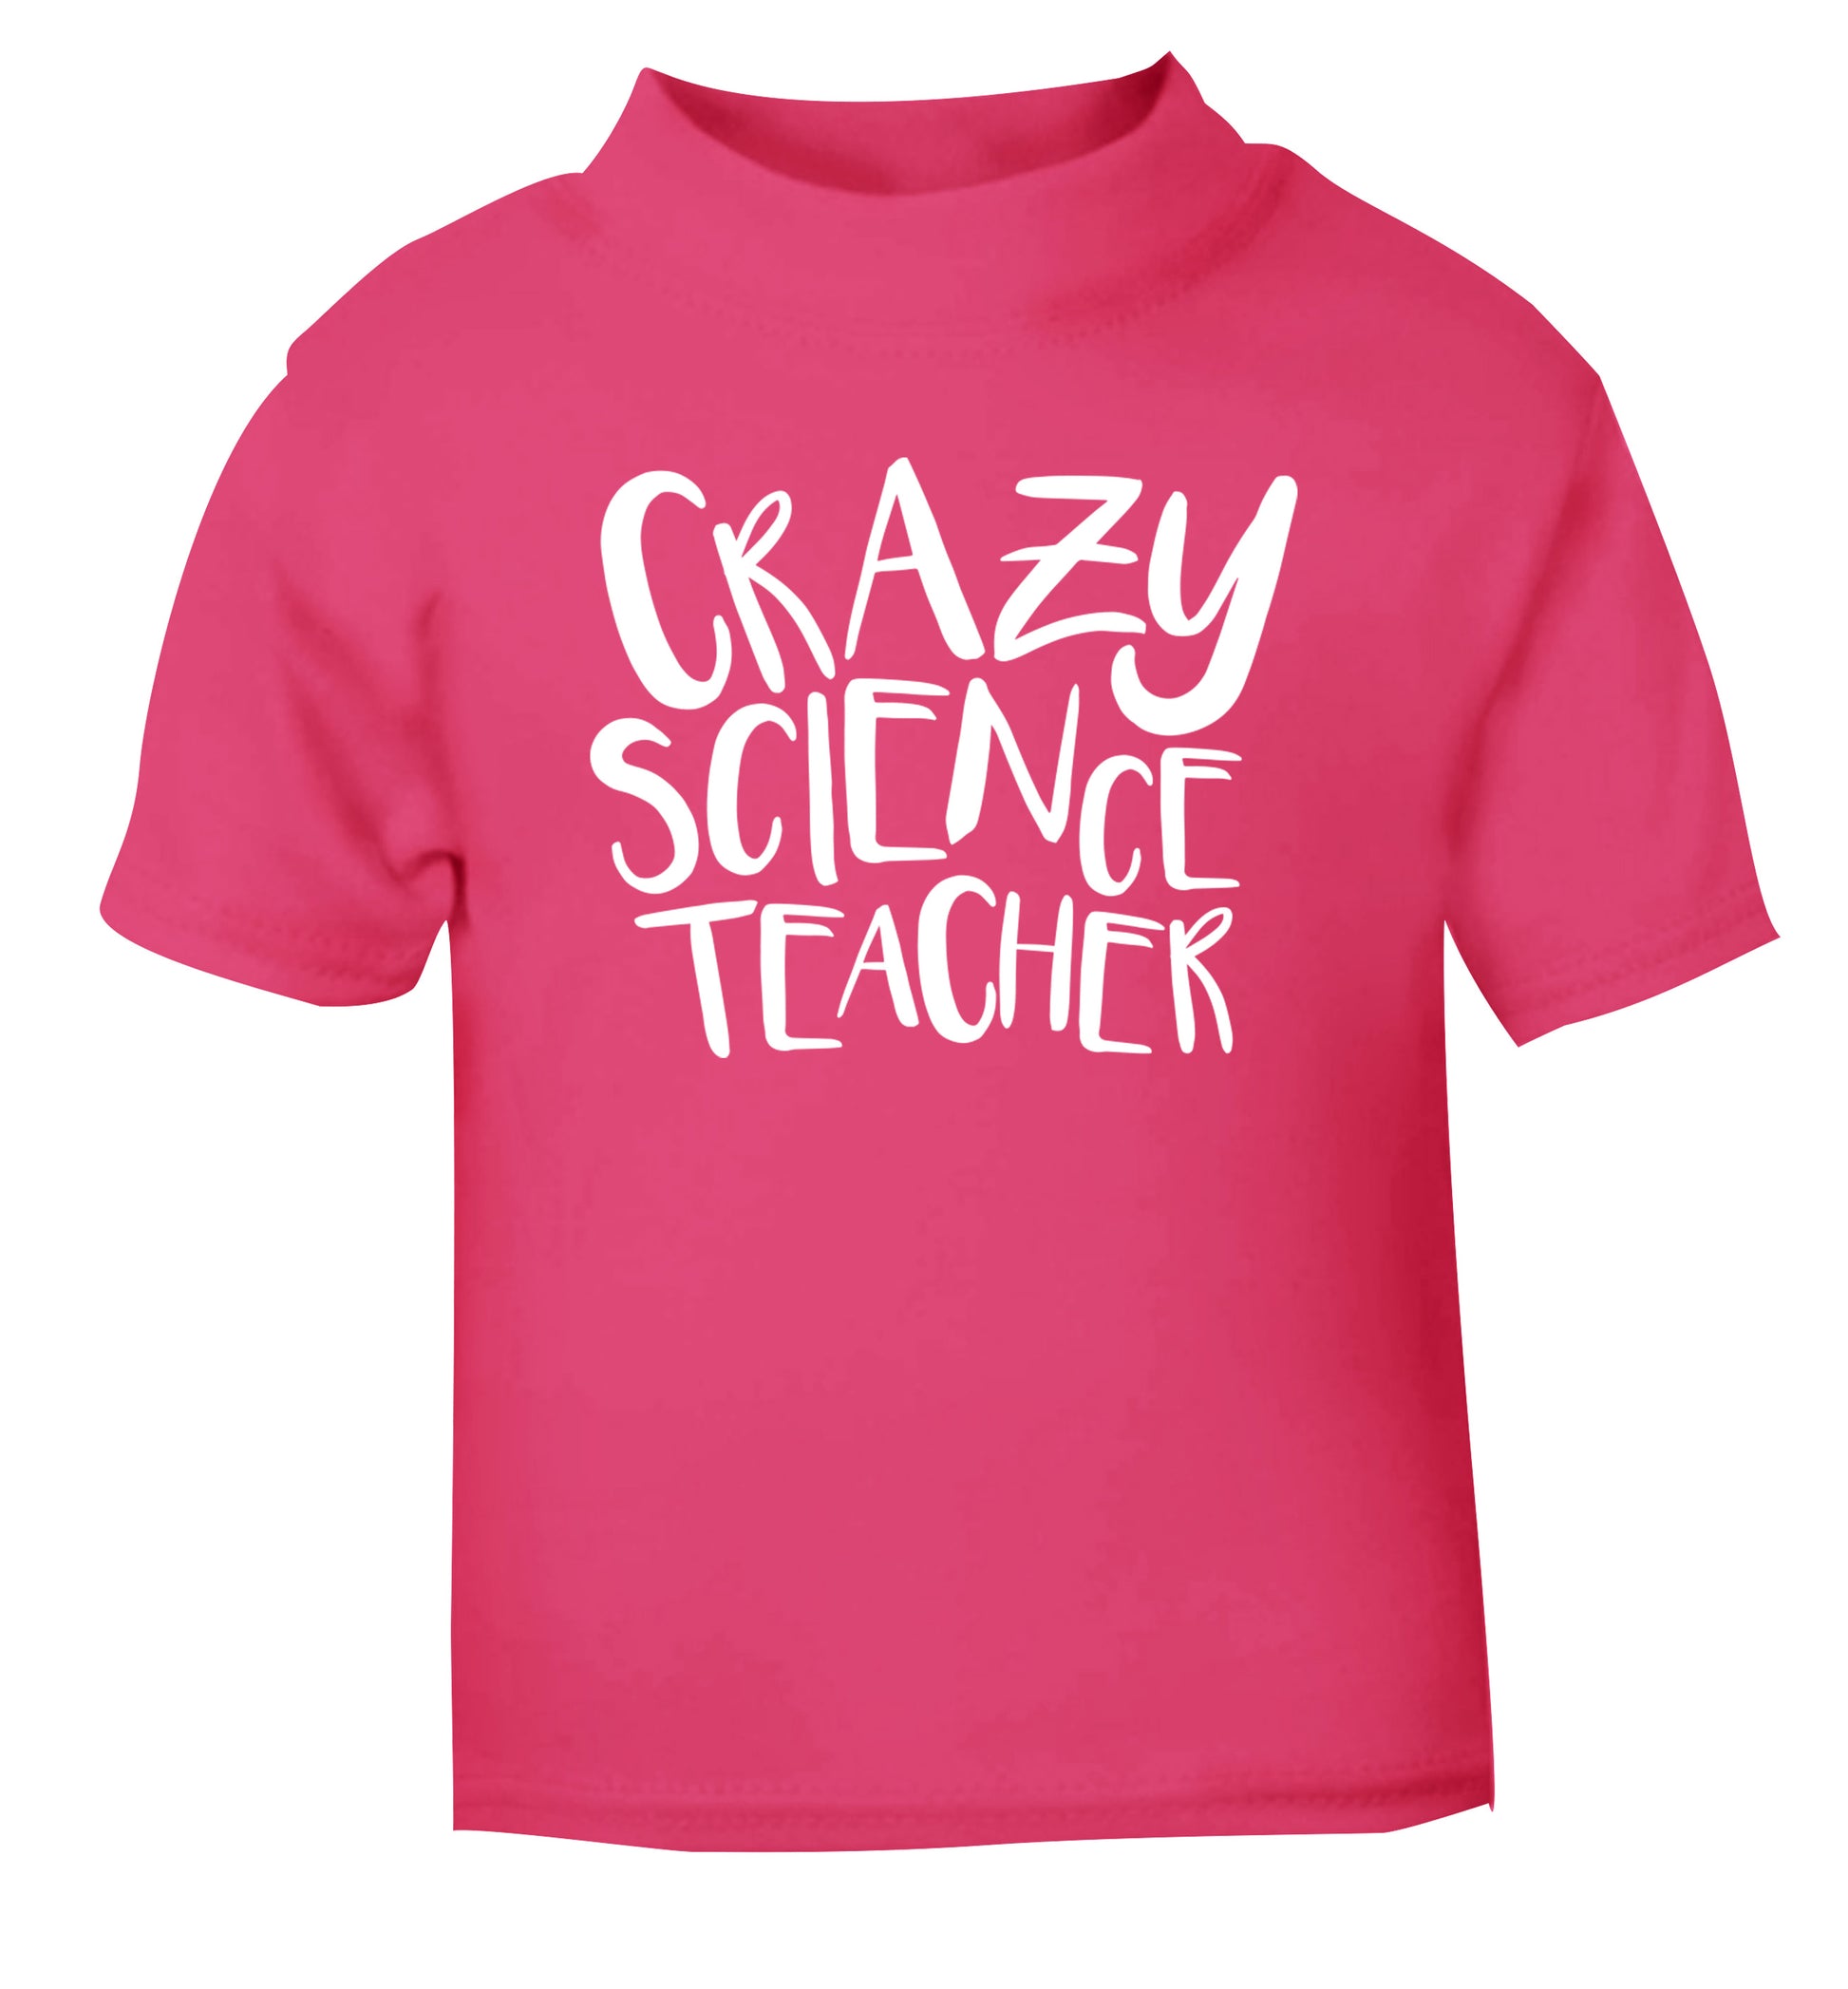 Crazy science teacher pink Baby Toddler Tshirt 2 Years